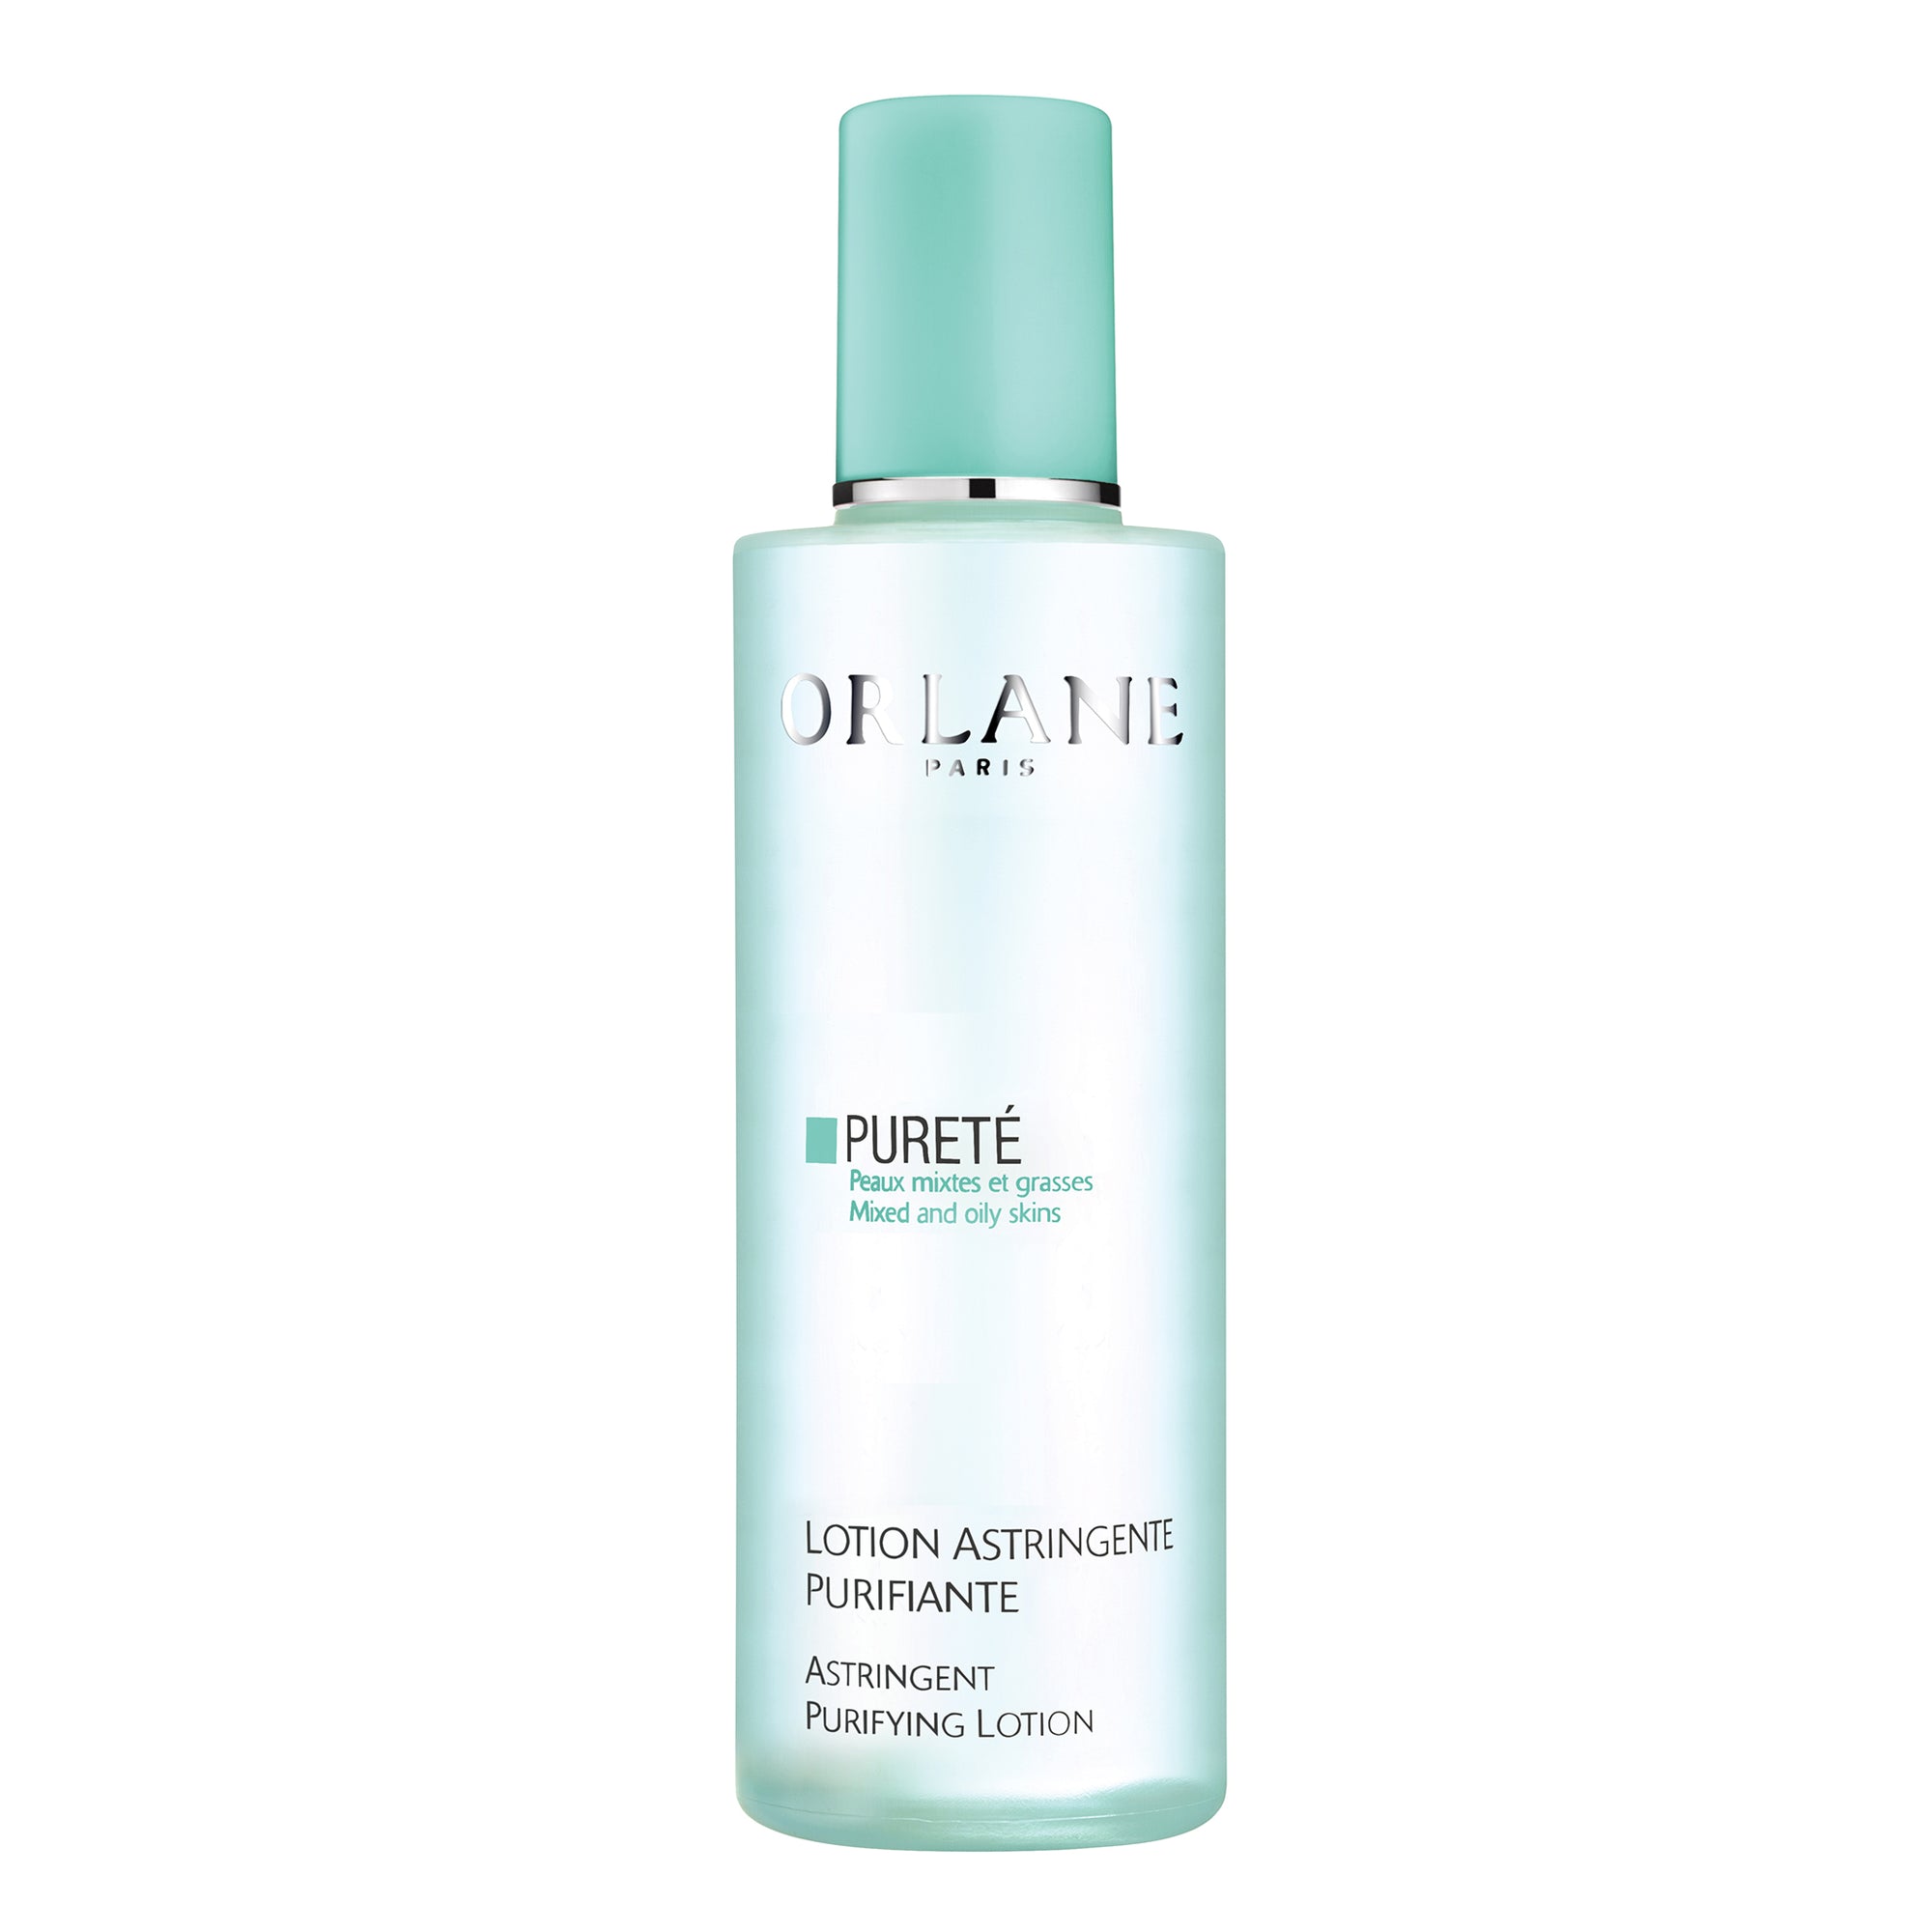 ORLANE - Purete • Active Ingredients Balance Oily and Combination Skin Types